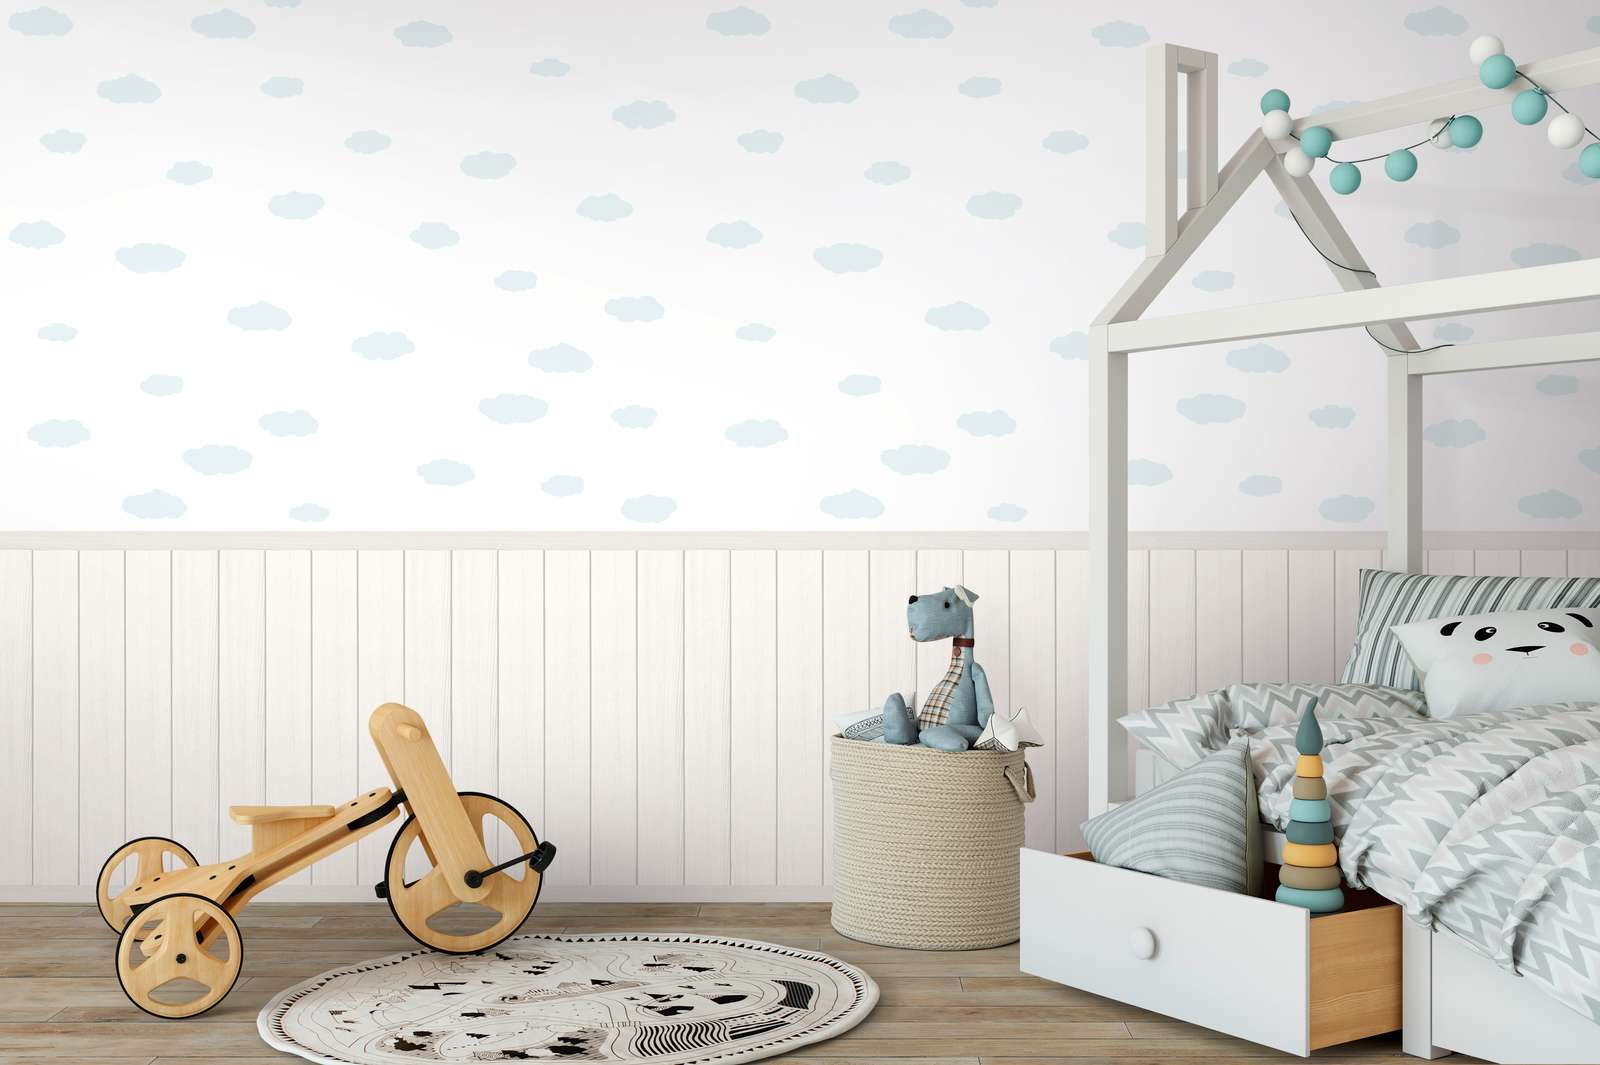             Non-woven motif wallpaper with wood-effect plinth border and cloud pattern - white, blue, grey
        